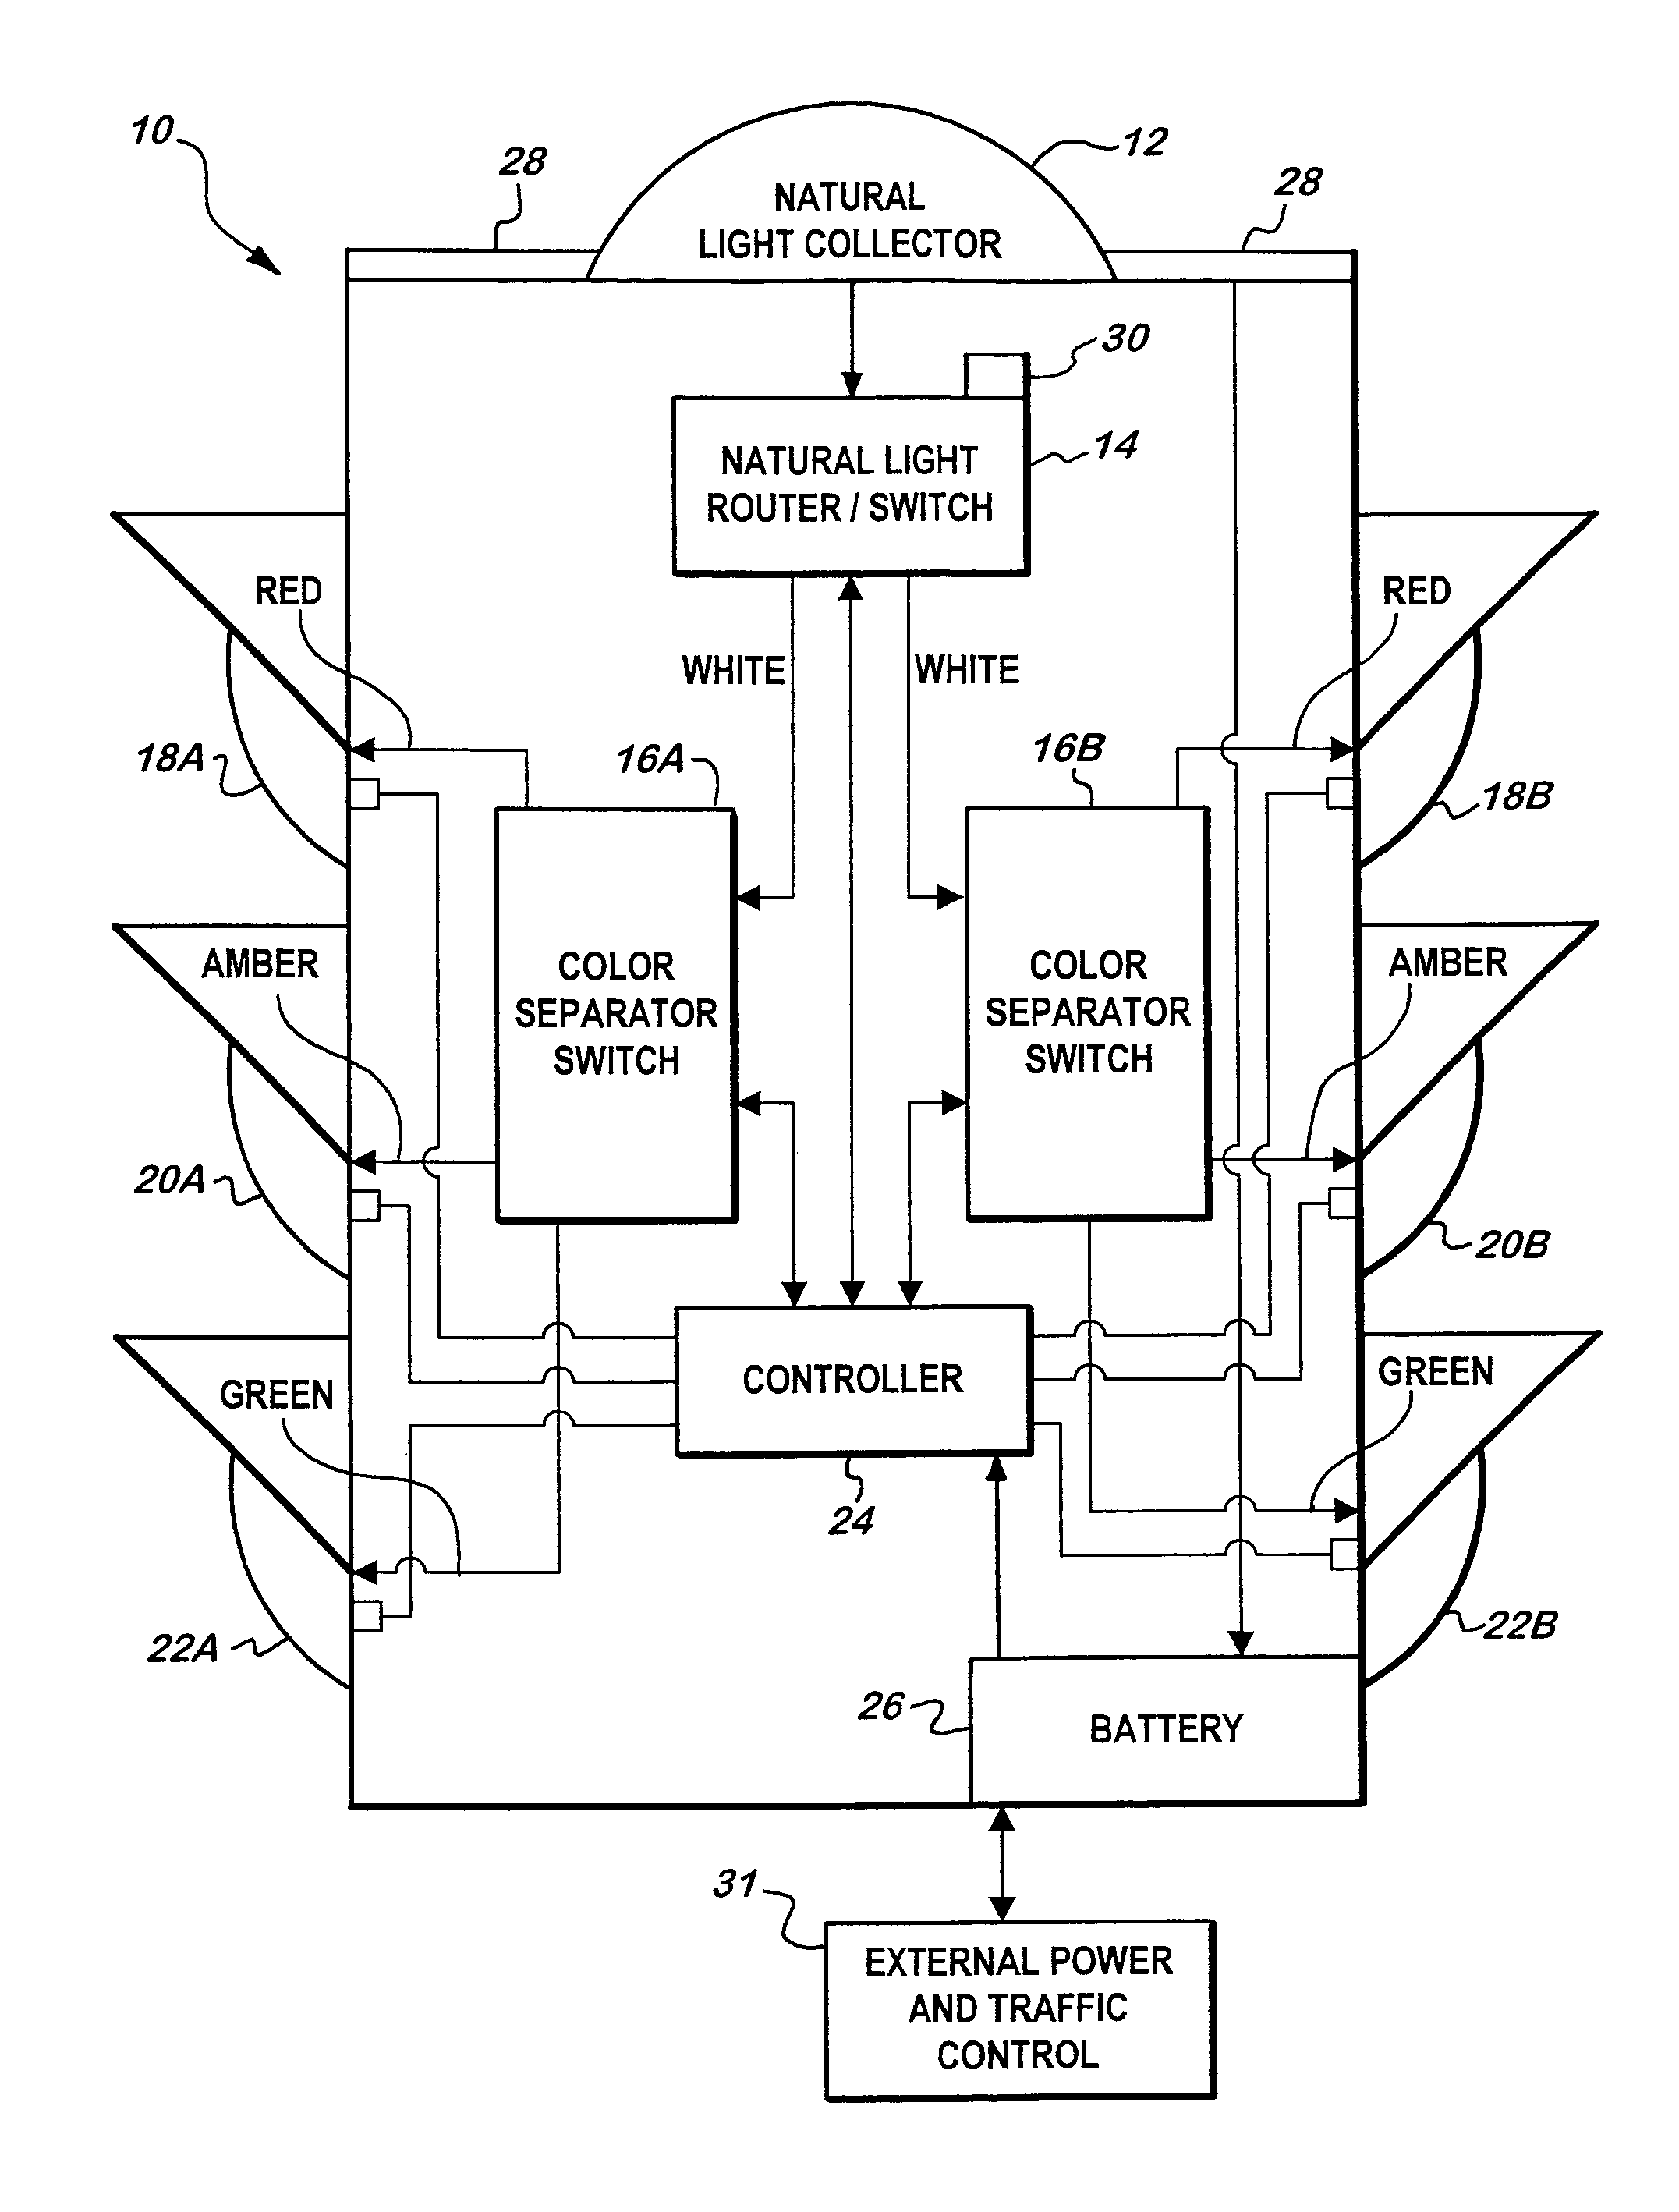 Self contained and powered traffic signal using natural and artificial light